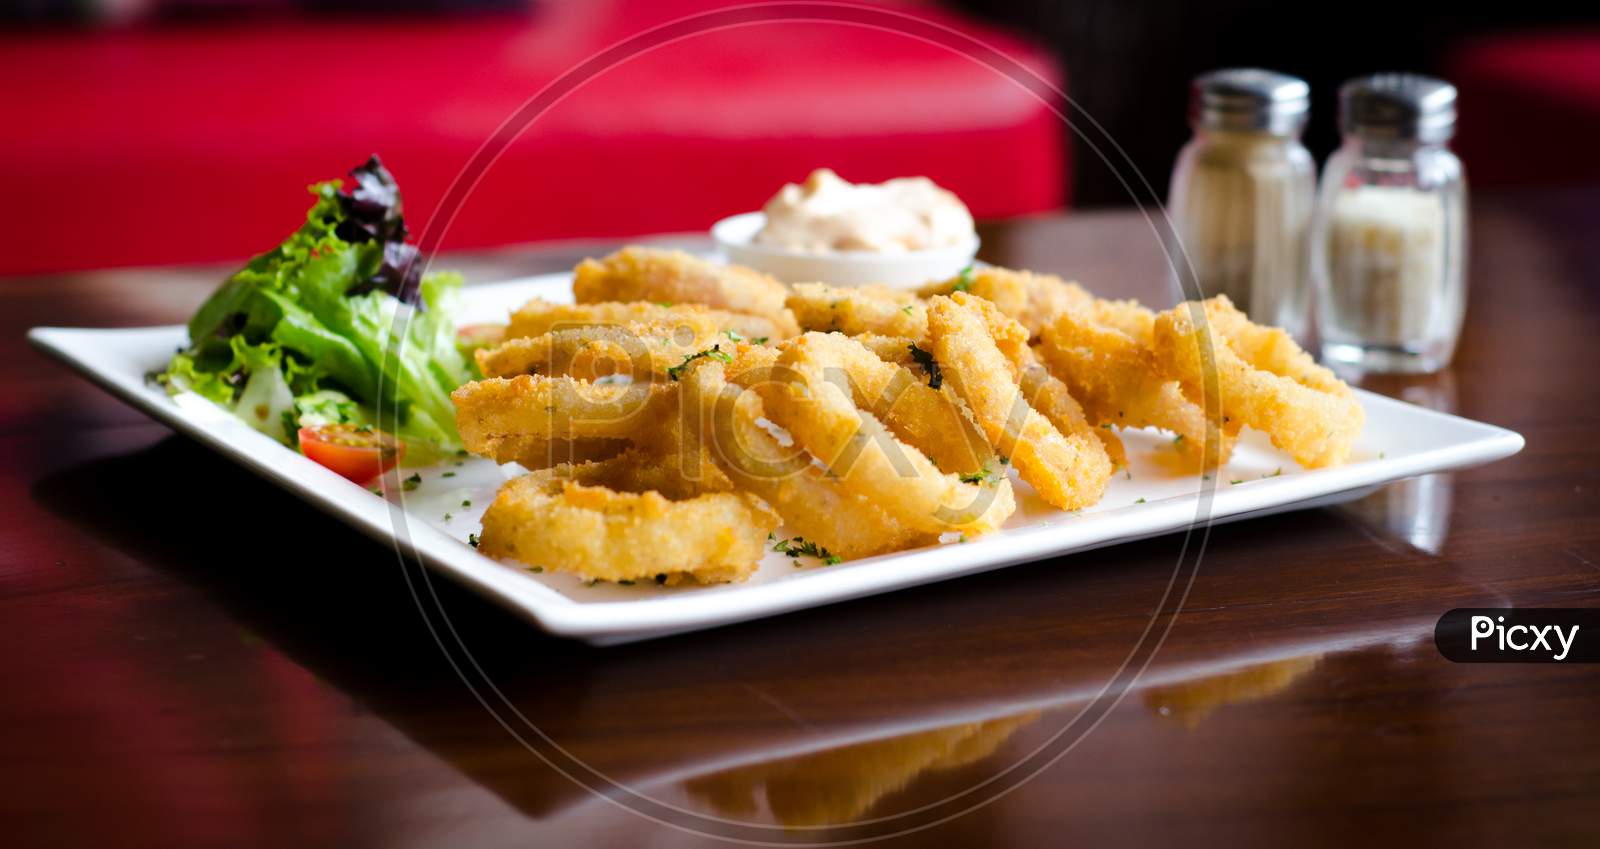 Tasty Onion Rings With Great Presentation